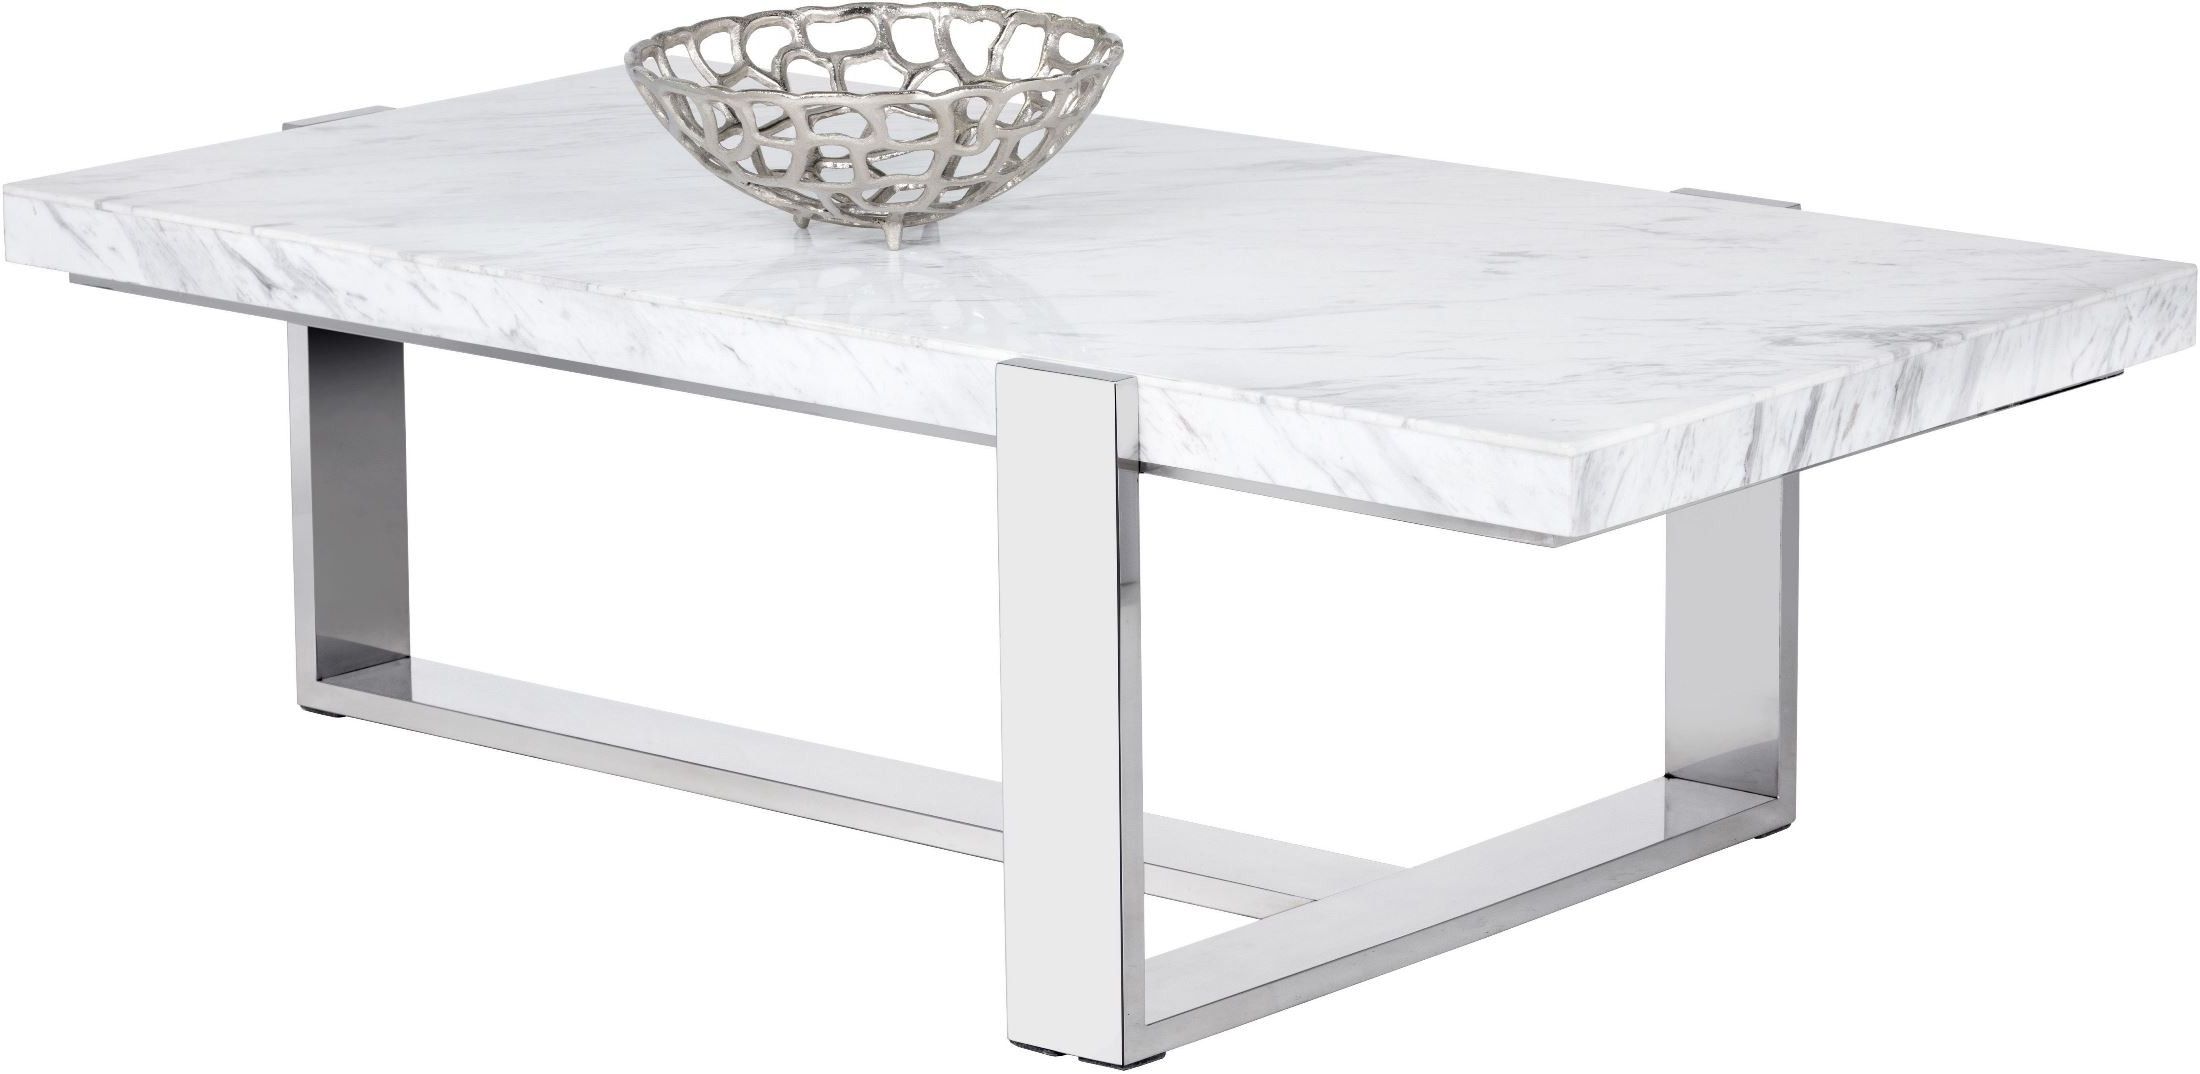 Tribecca White Marble Rectangular Coffee Table, 101294 Regarding Trendy Faux White Marble And Metal Coffee Tables (View 13 of 20)